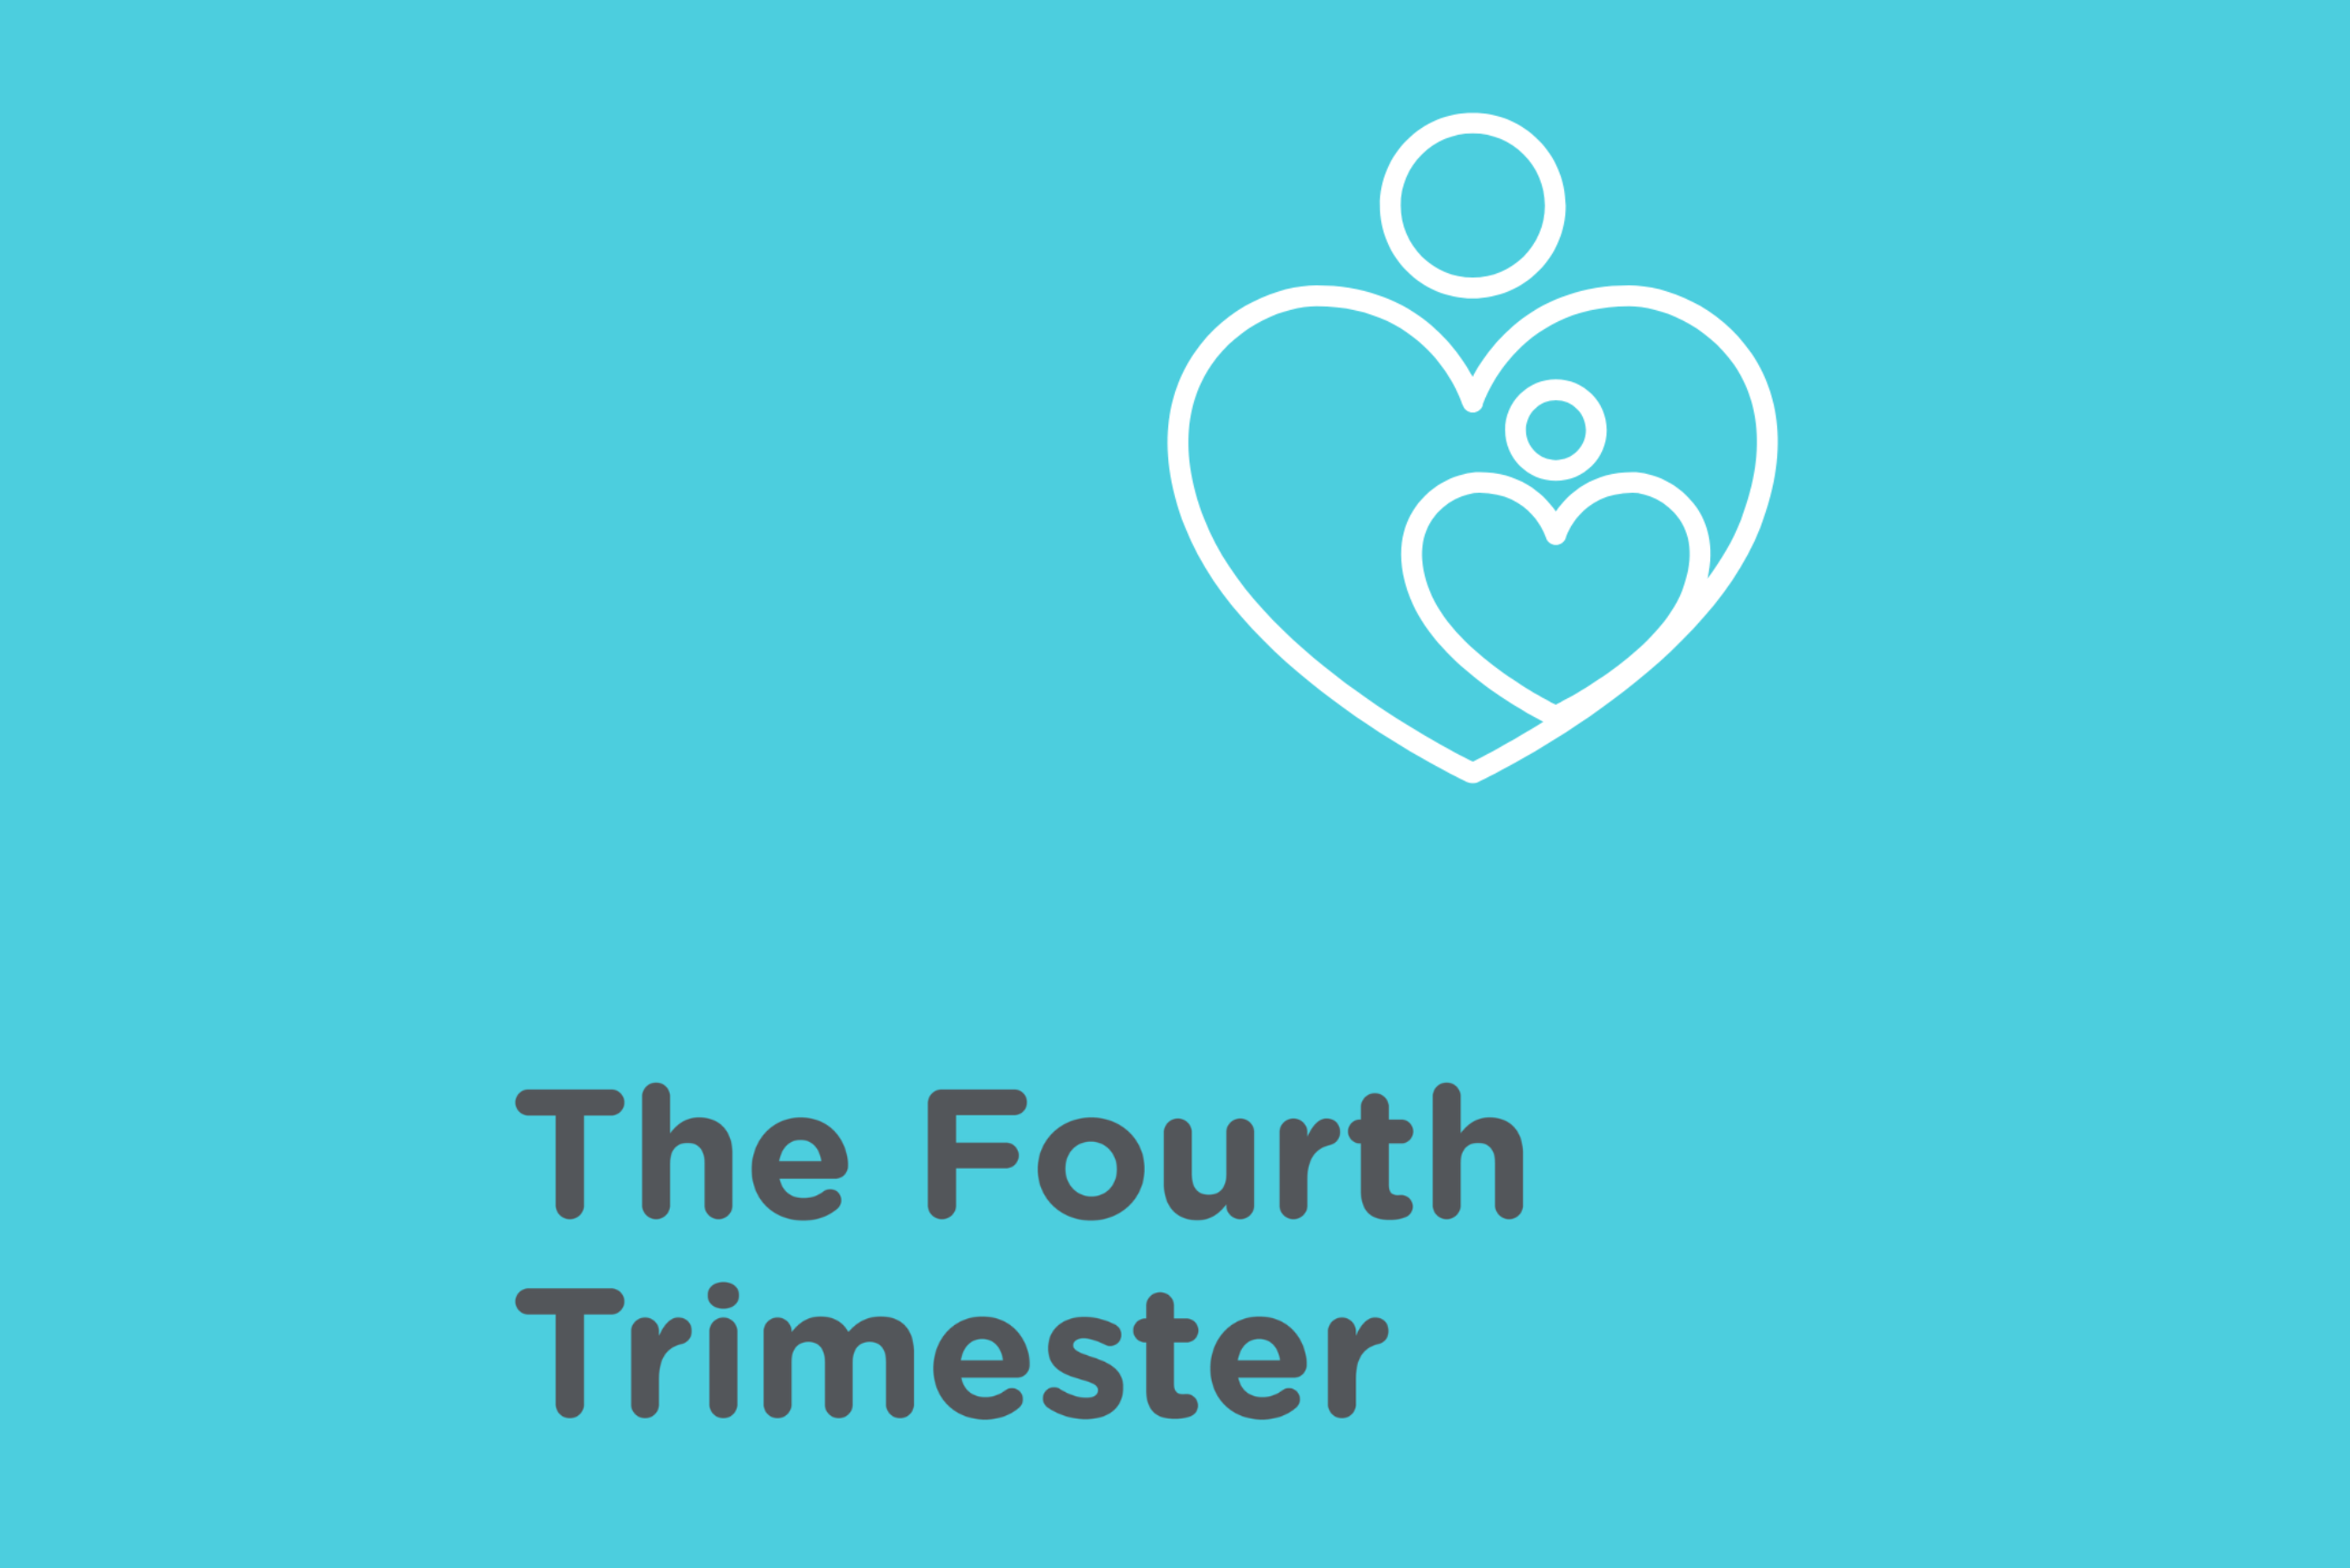 The Fourth Trimester with images of hearts